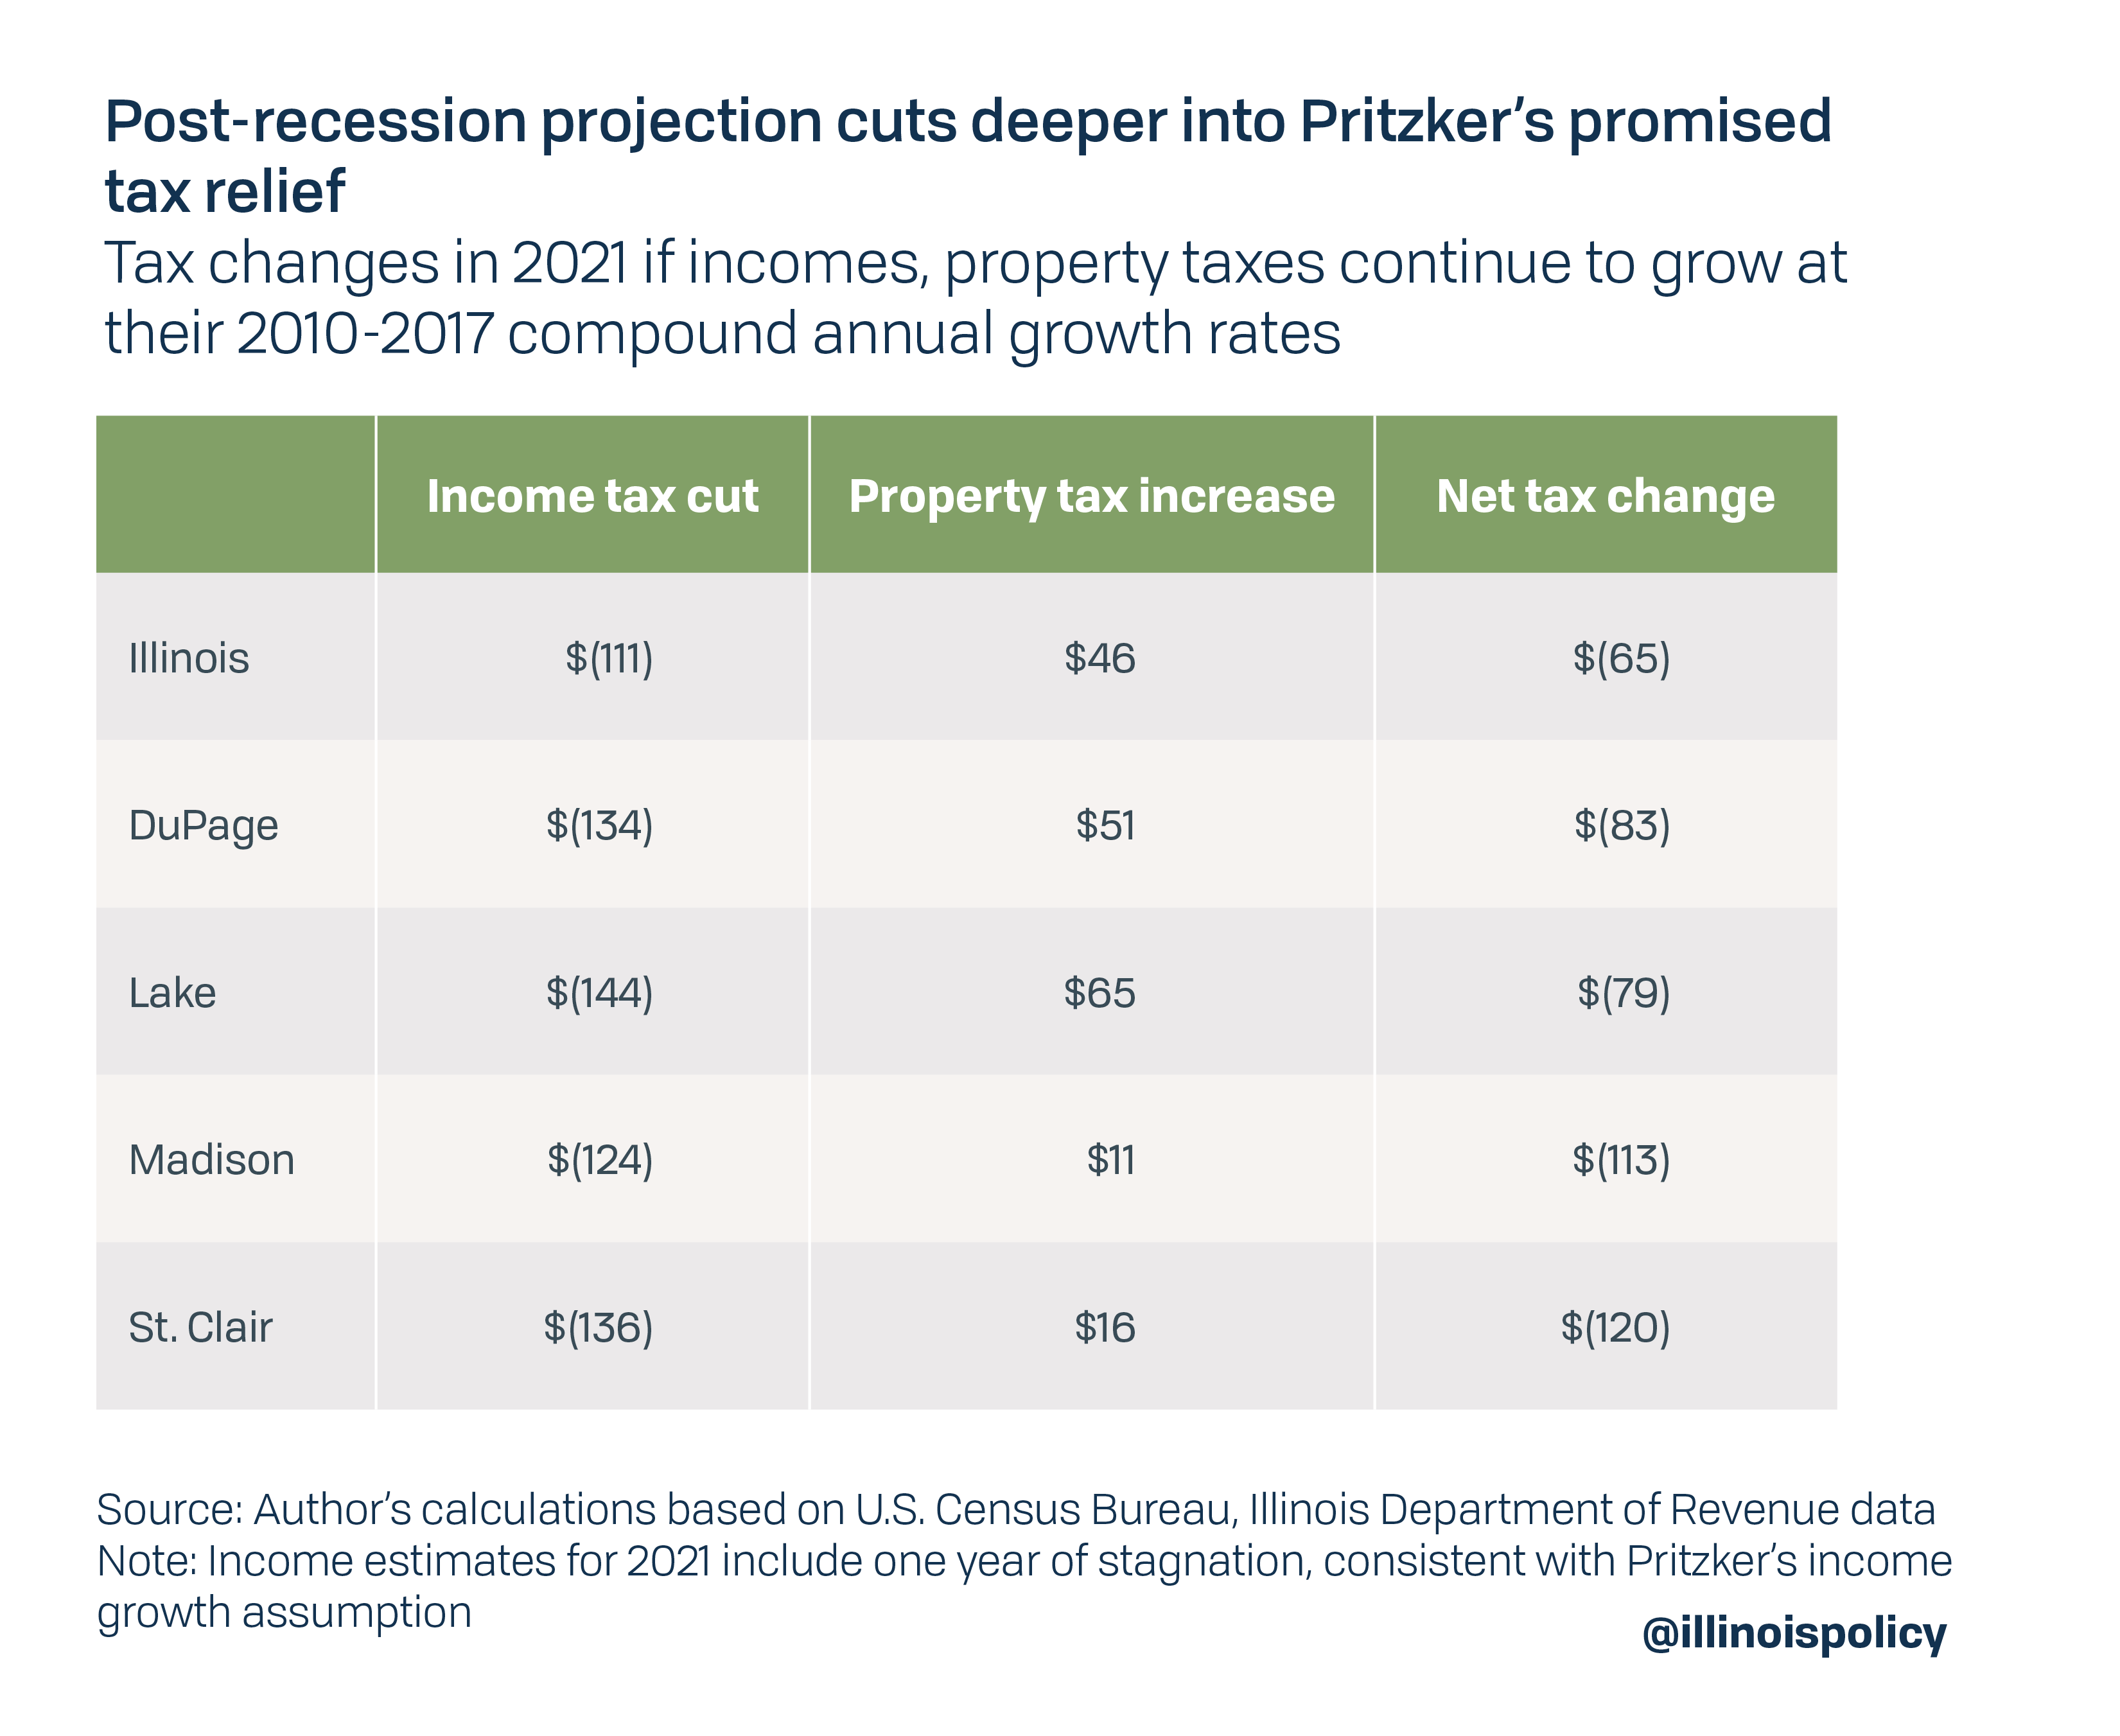 Post-recession projection projection cuts deeper into Pritzker's promised tax relief